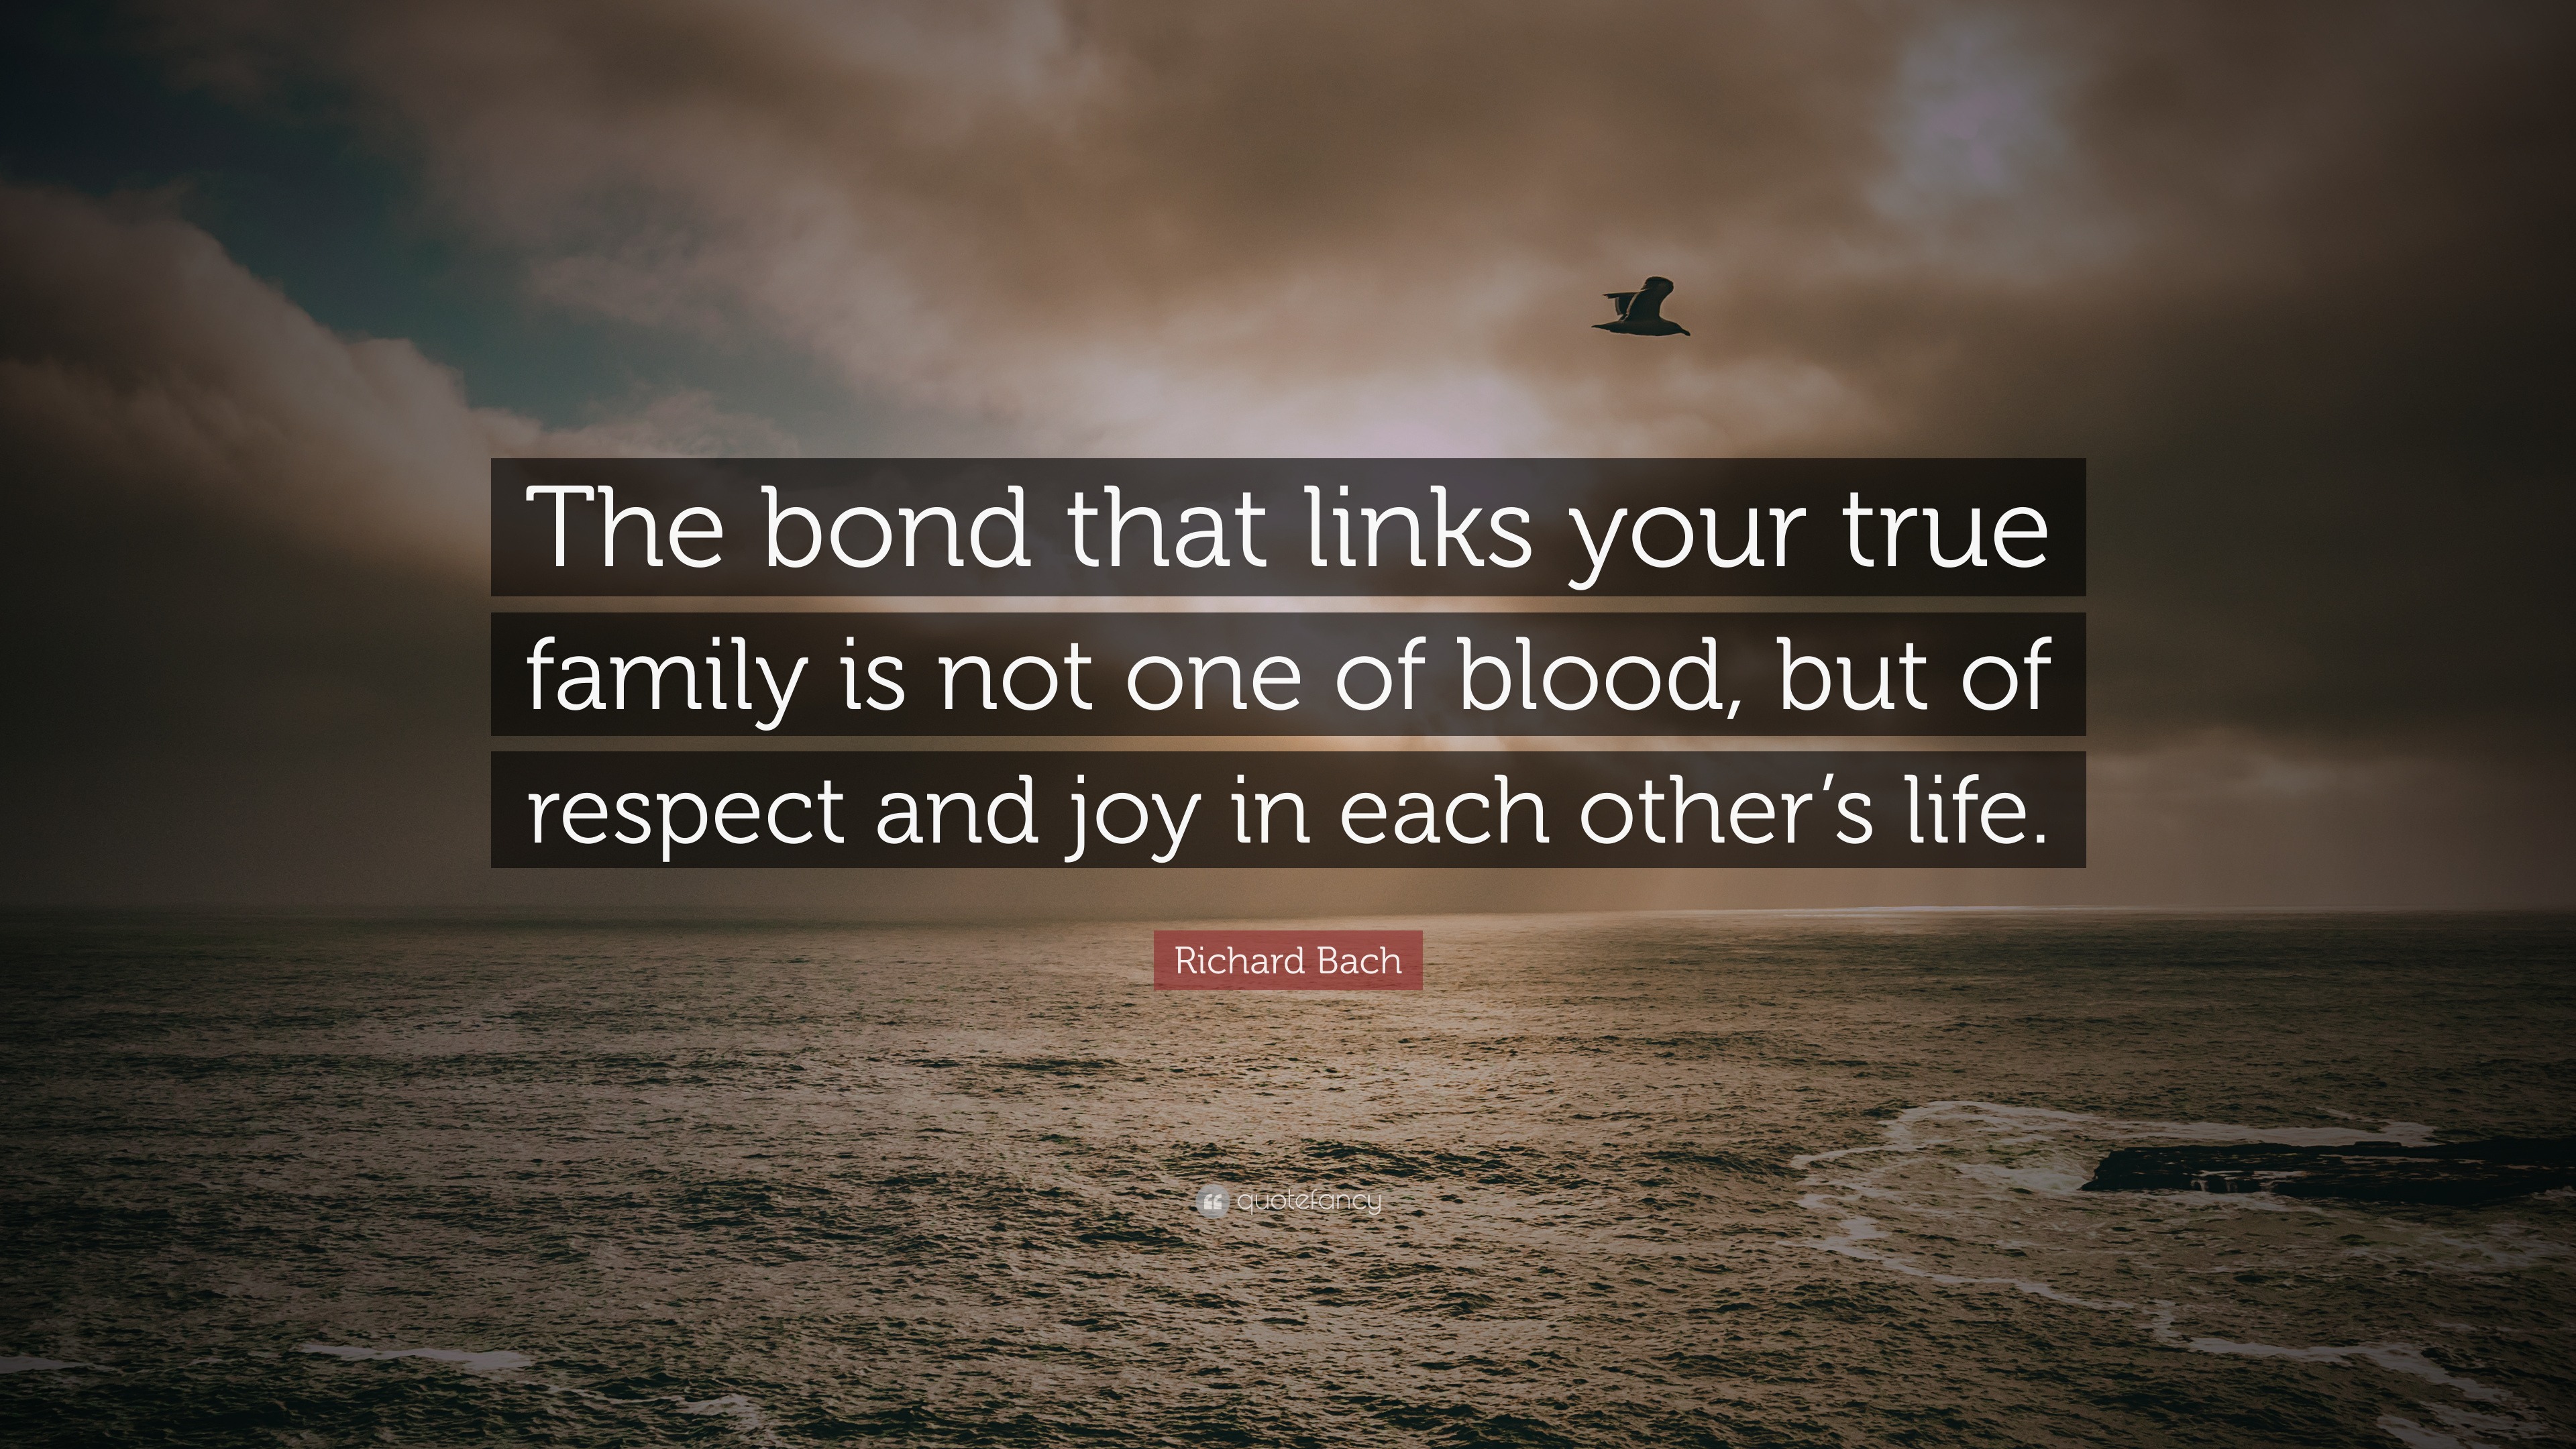 Richard Bach Quote  The bond  that links your true family  